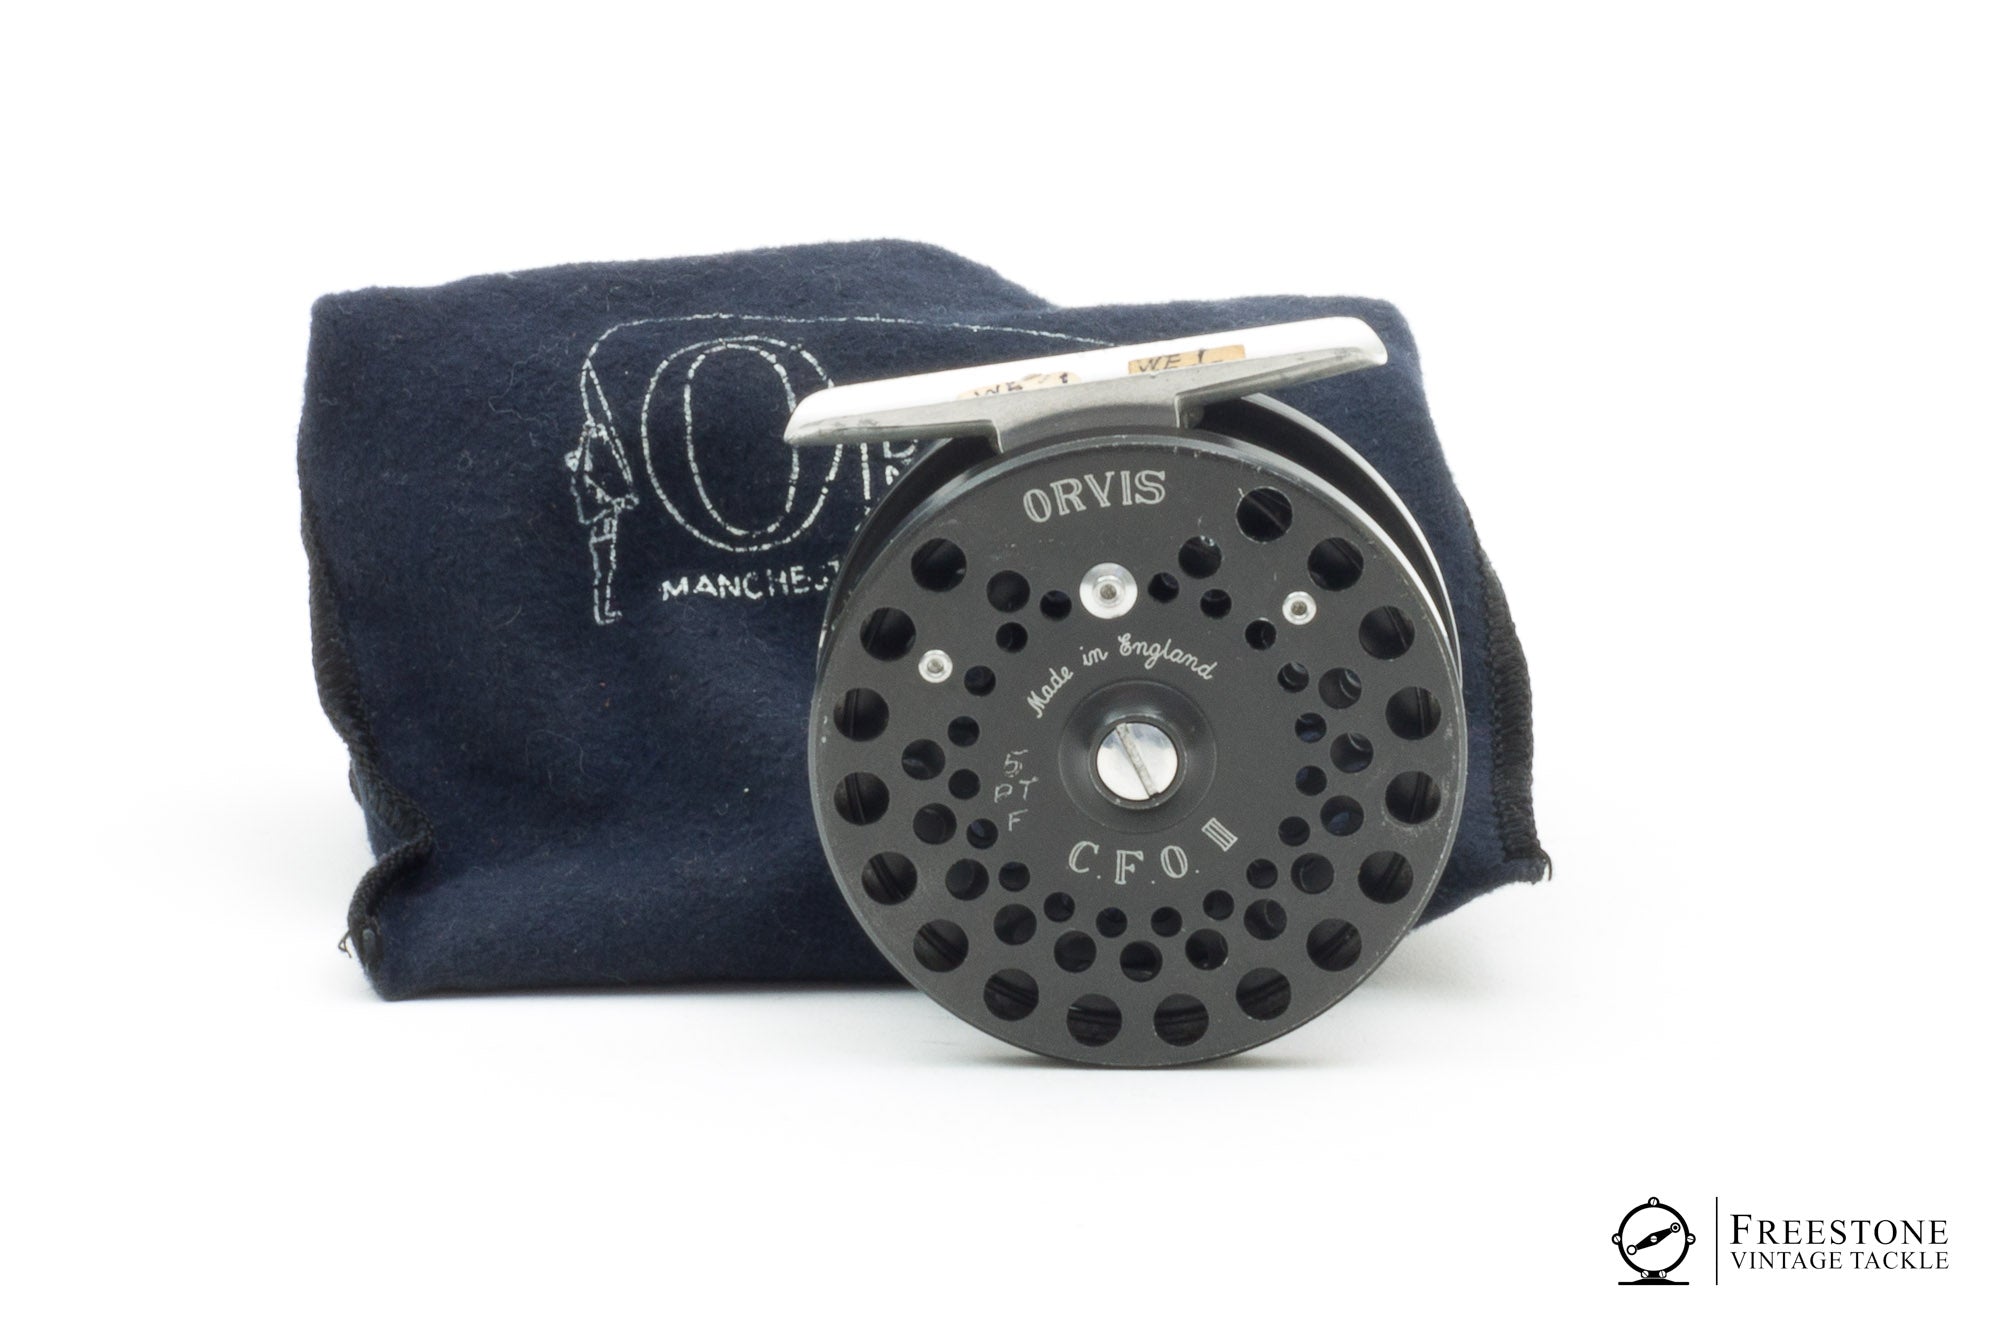 Rare Orvis Cfo 3 Disc Fly Reel C.F.O. With Case, Engine In Good Condition,  Limit